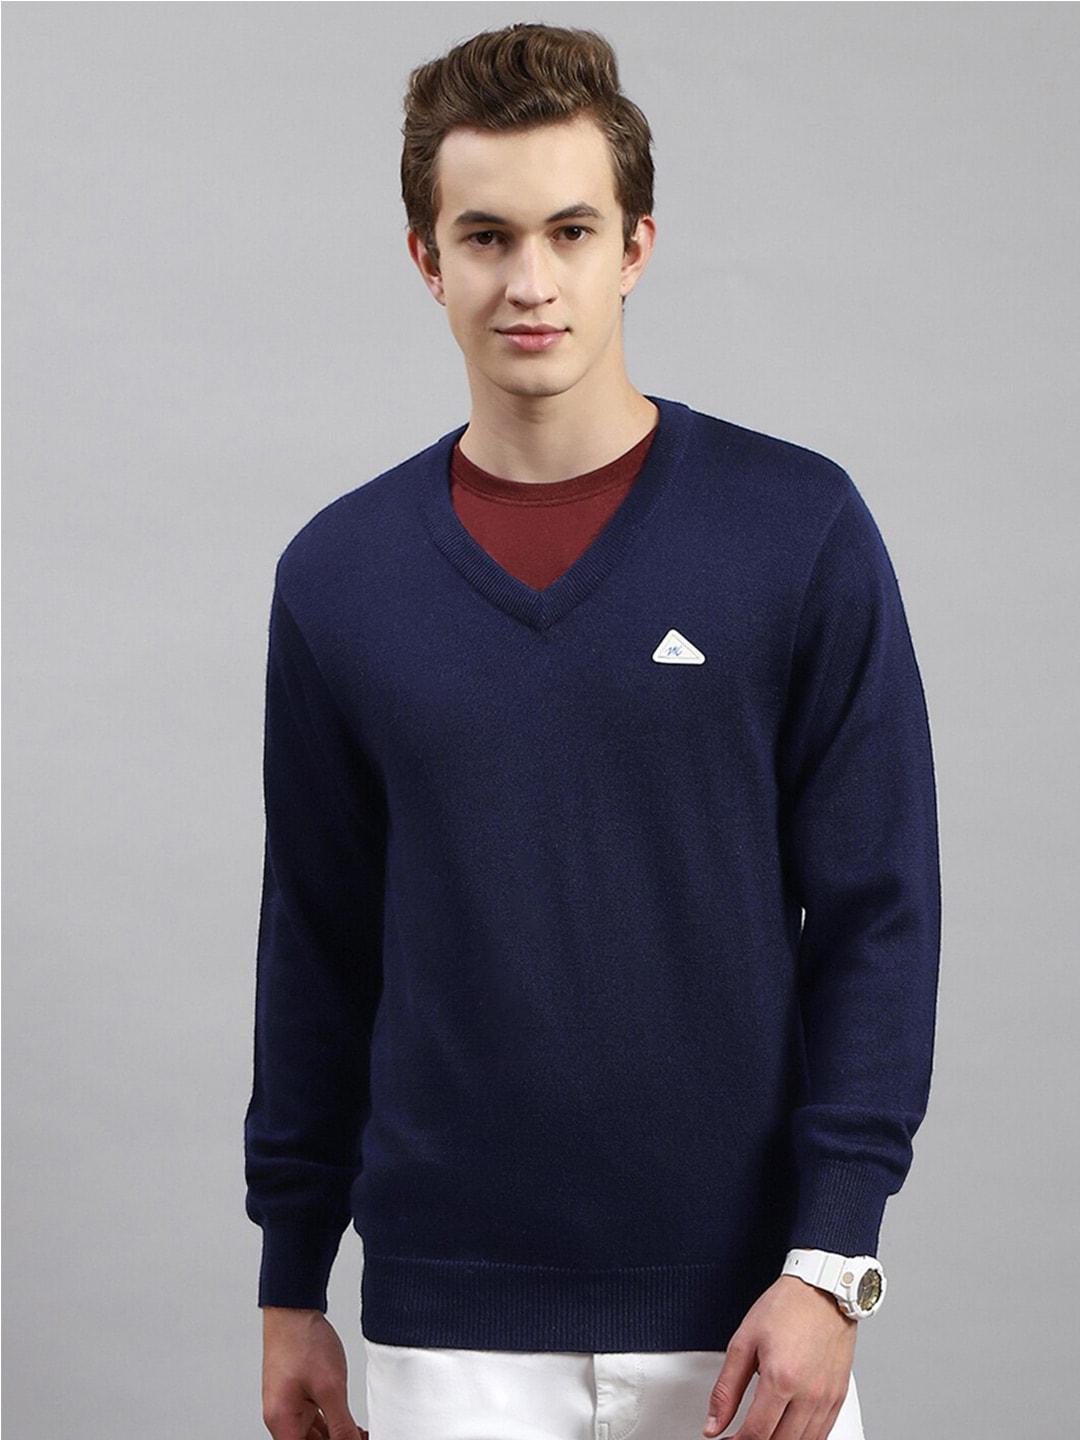 Monte Carlo V-Neck Long Sleeves Woollen Pullover